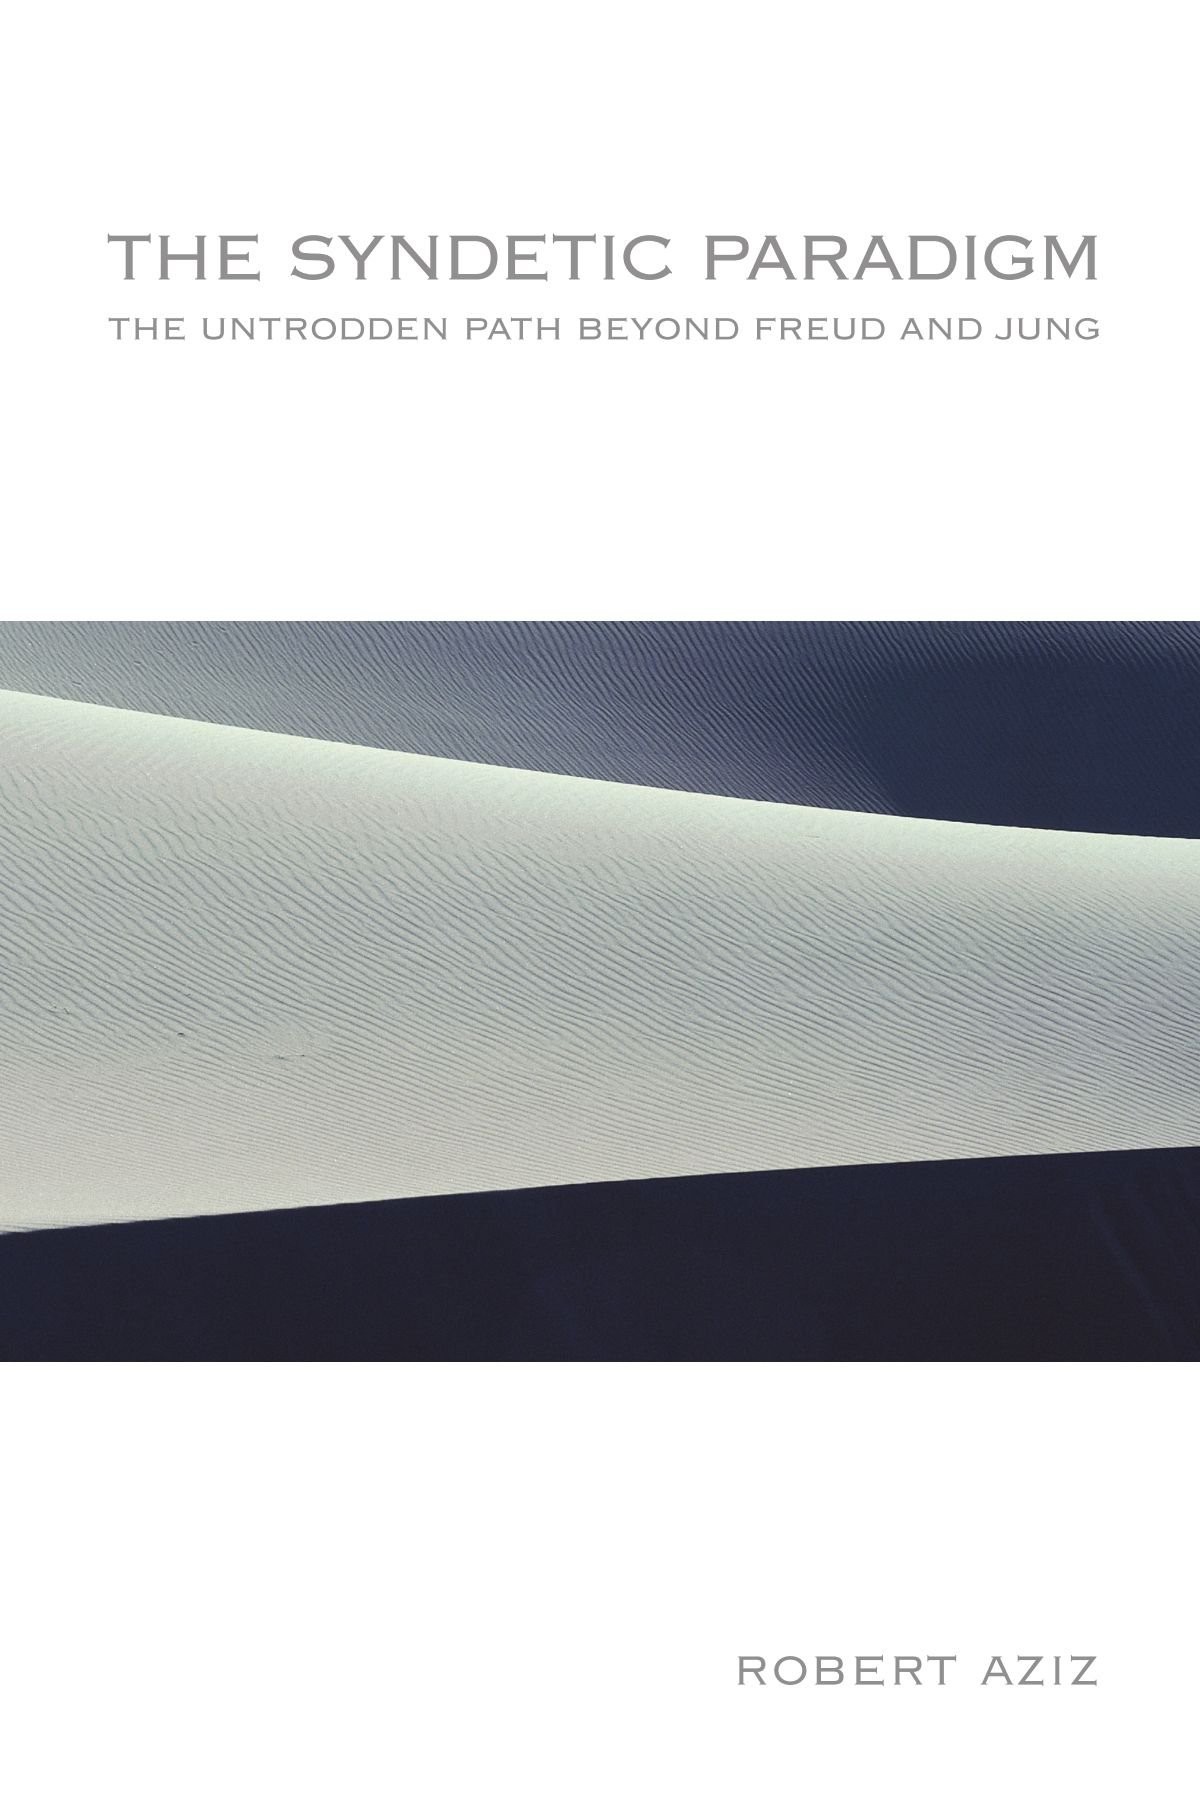 The Syndetic Paradigm: The Untrodden Path Beyond Freud and Jung